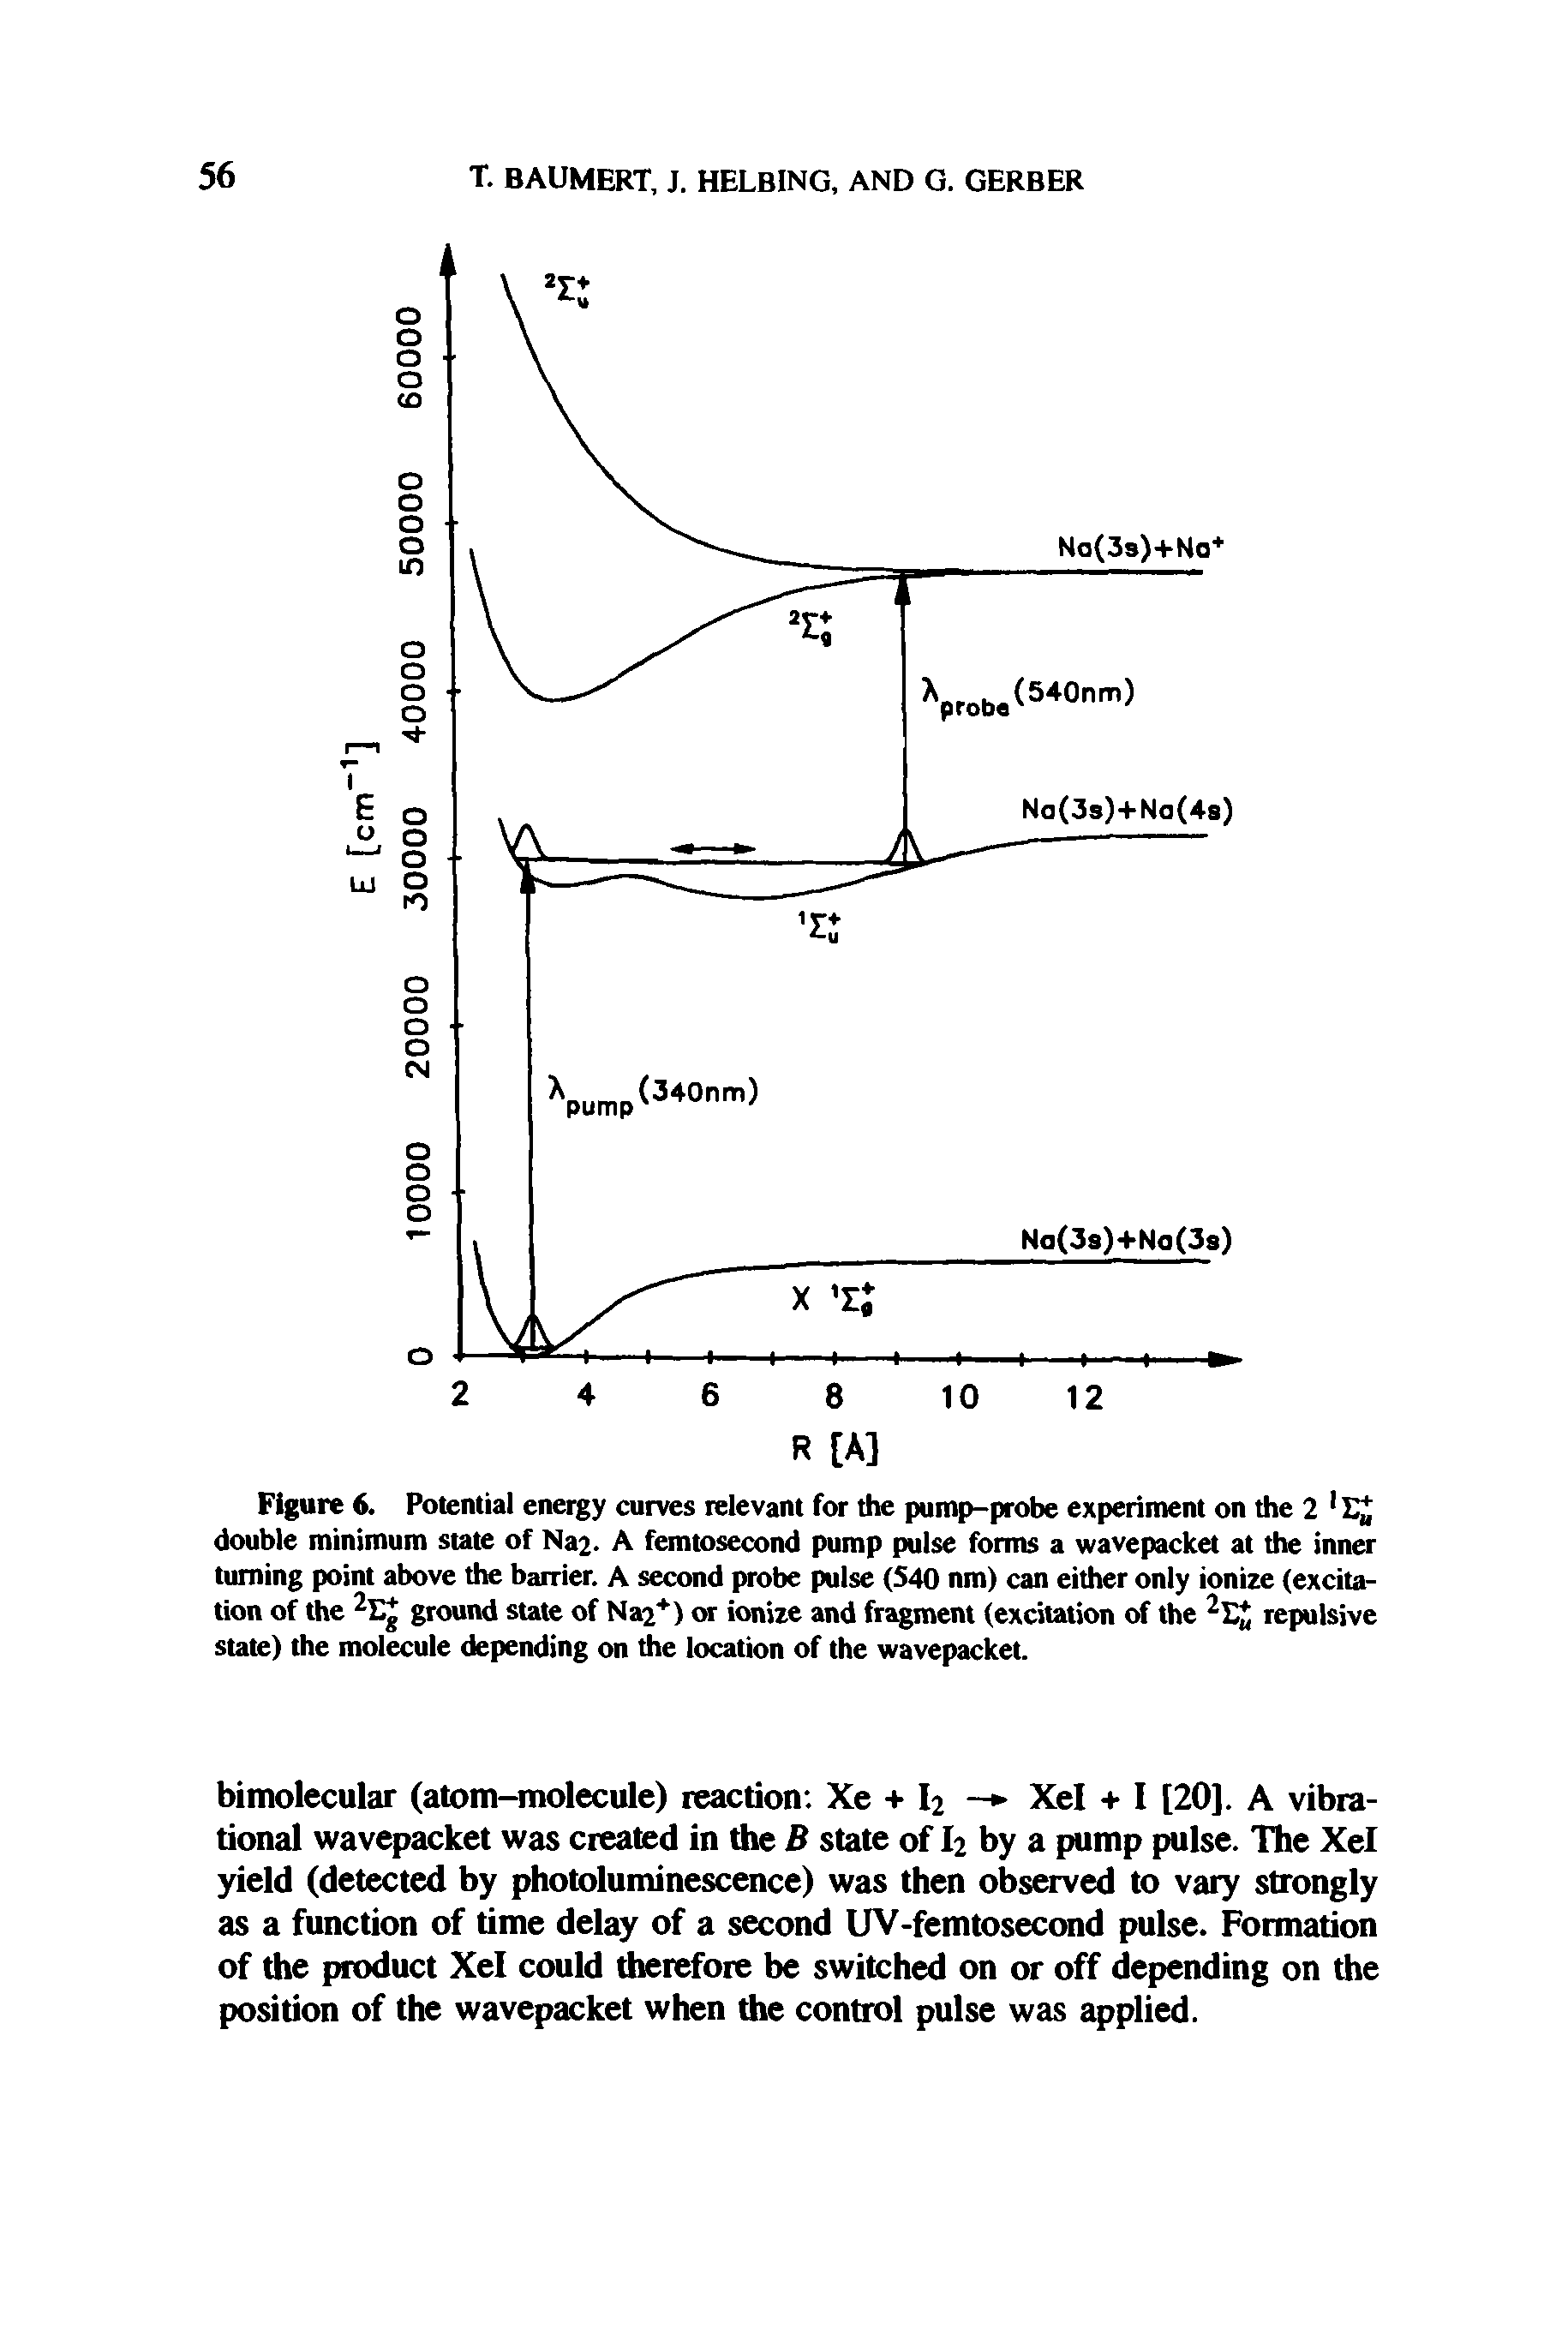 Figure 6. Potential energy curves relevant for the pump-probe experiment on the 2 1 double minimum state of Na2- A femtosecond pump pulse forms a wavepacket at the inner turning point above the barrier. A second probe pulse (540 nm) can either only ionize (excitation of the ground state of Na2+) or ionize and fragment (excitation of the repulsive state) the molecule depending on the location of the wavepacket.